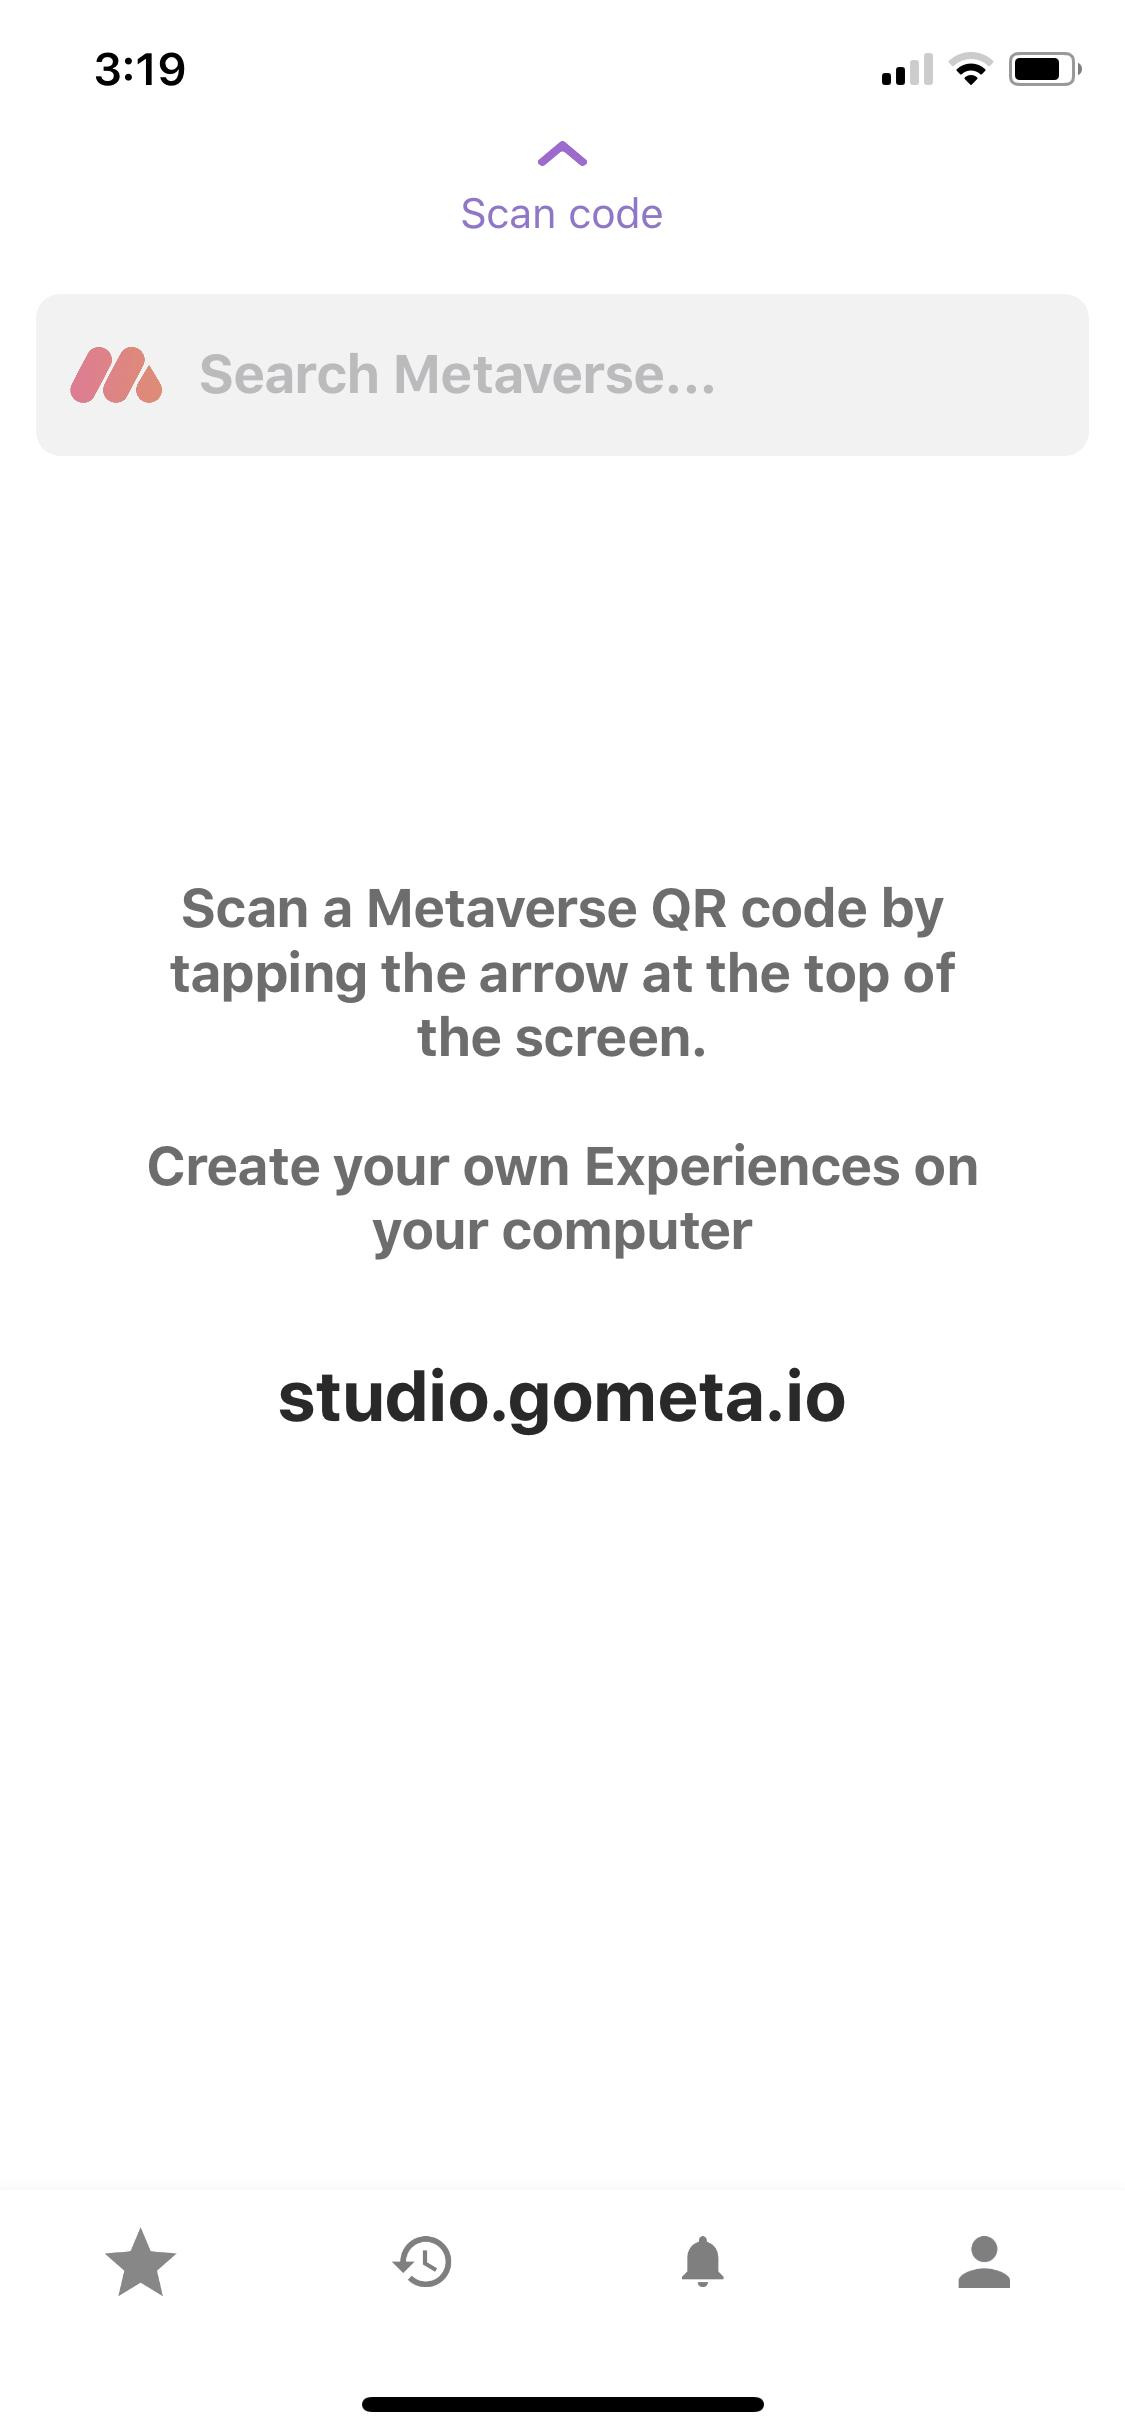 A screenshotted image displaying the 'Scan code' button in the Metaverse app.